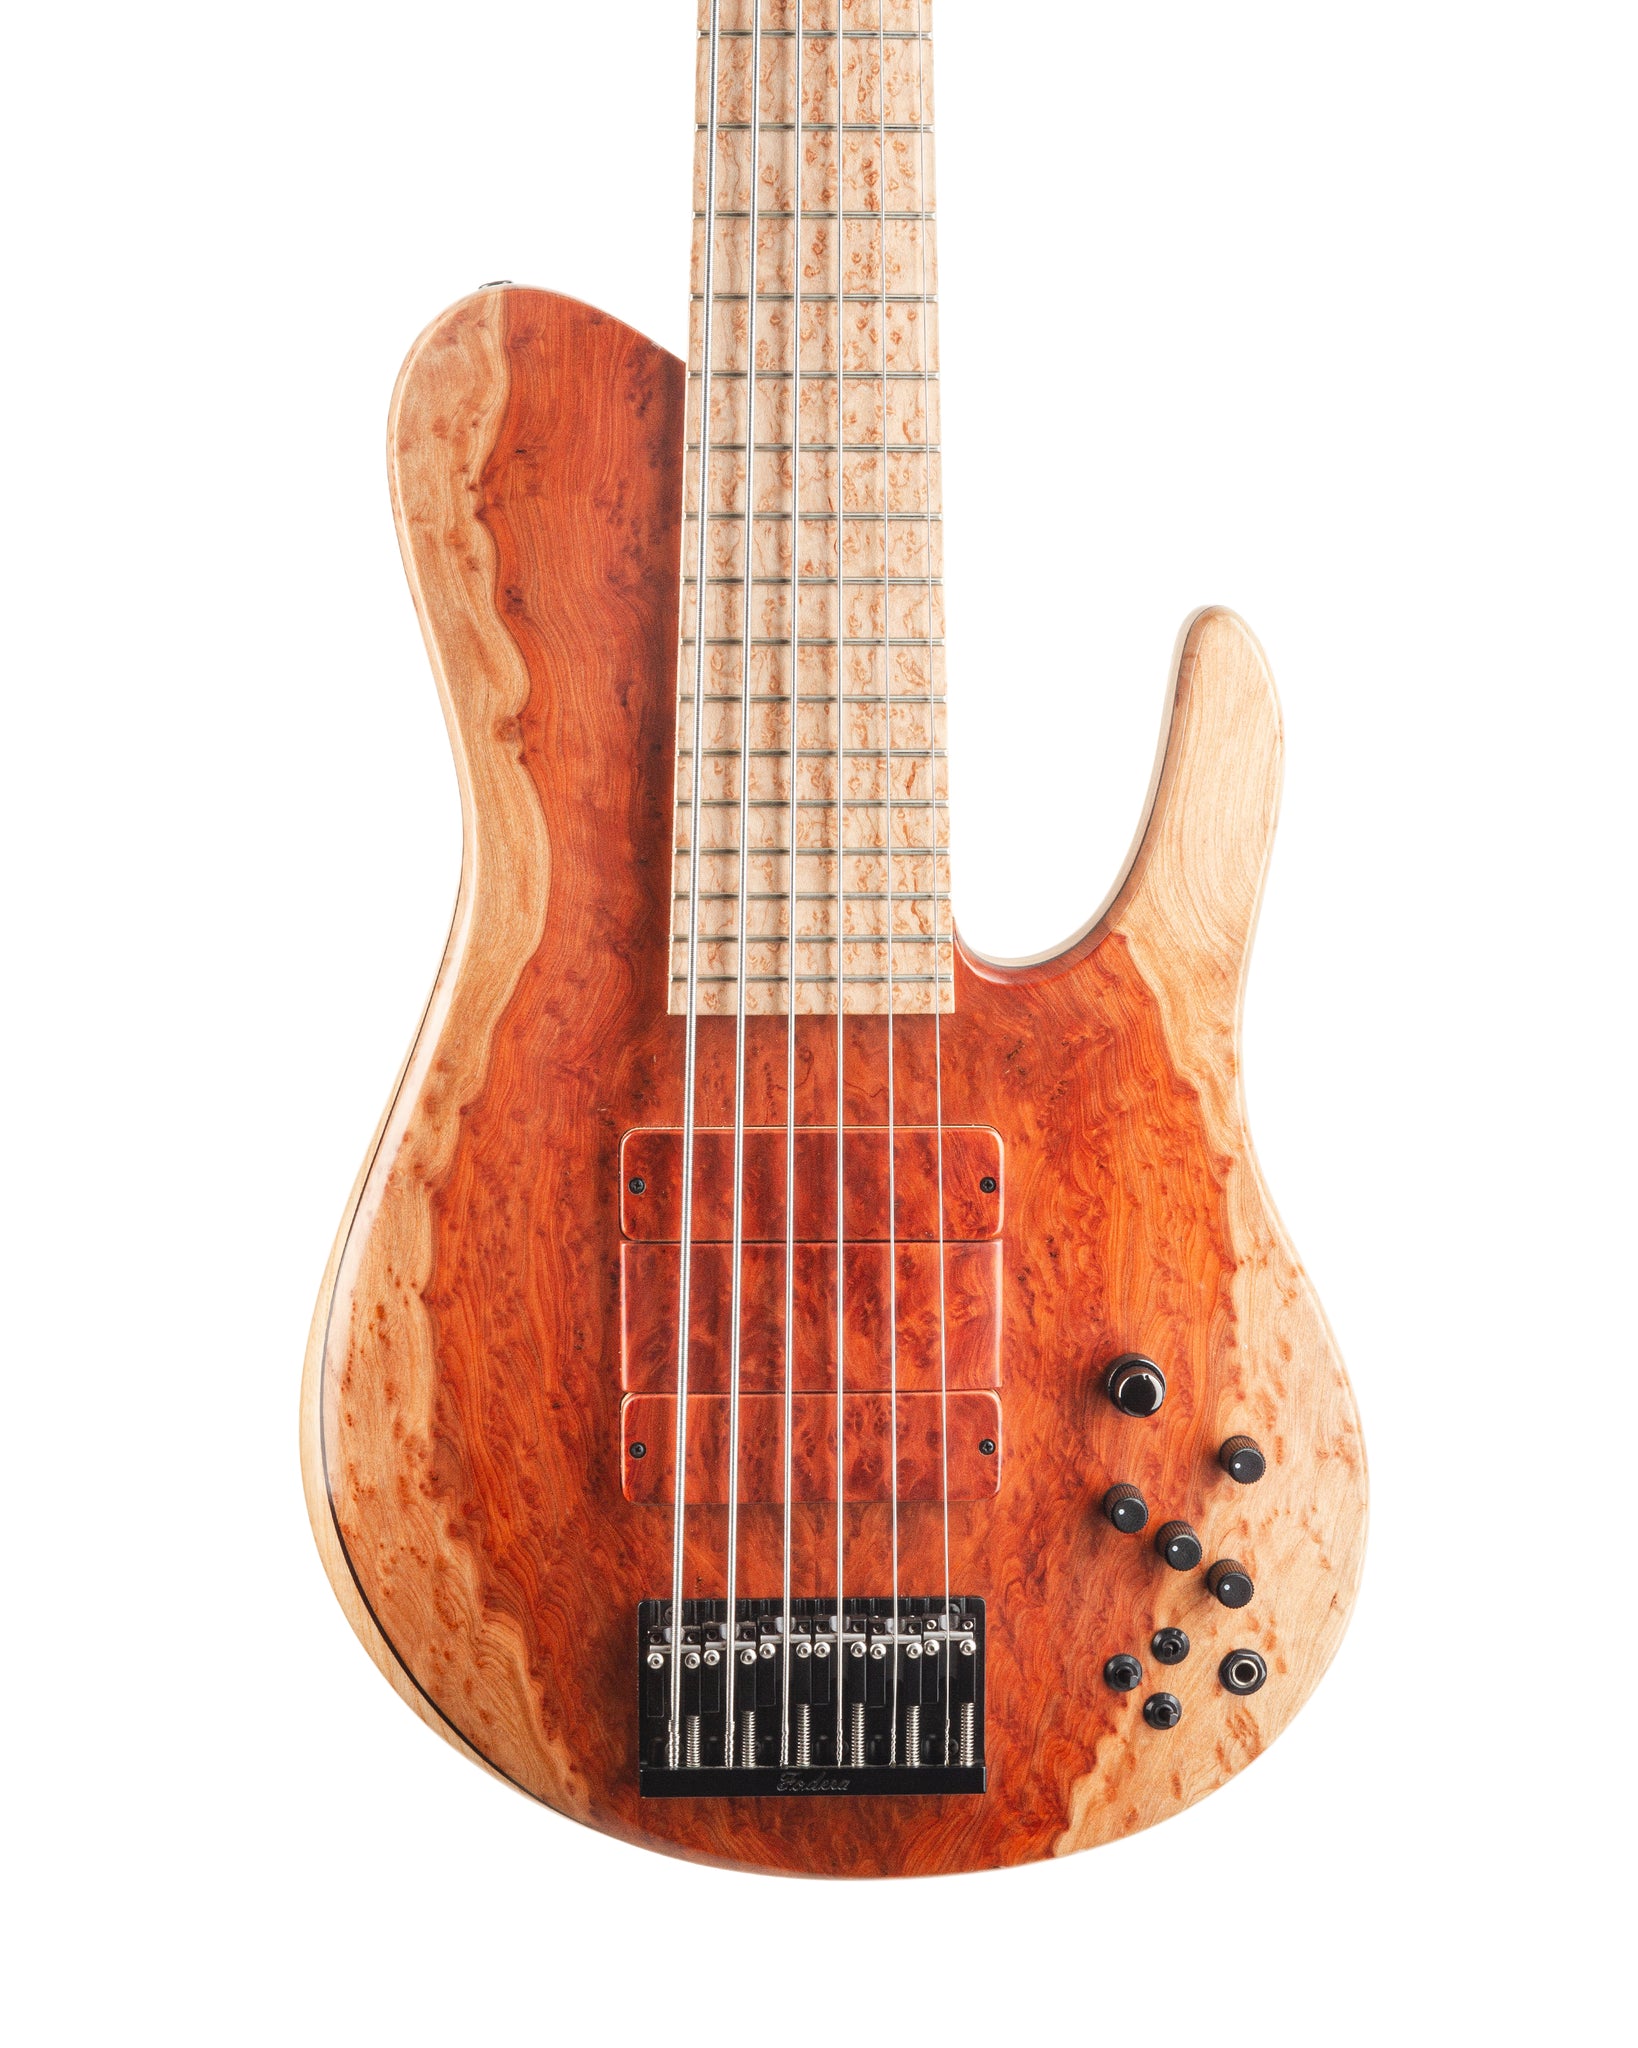 Reggie Young Signature Imperial MG 6 Bolt-On - DEPOSIT